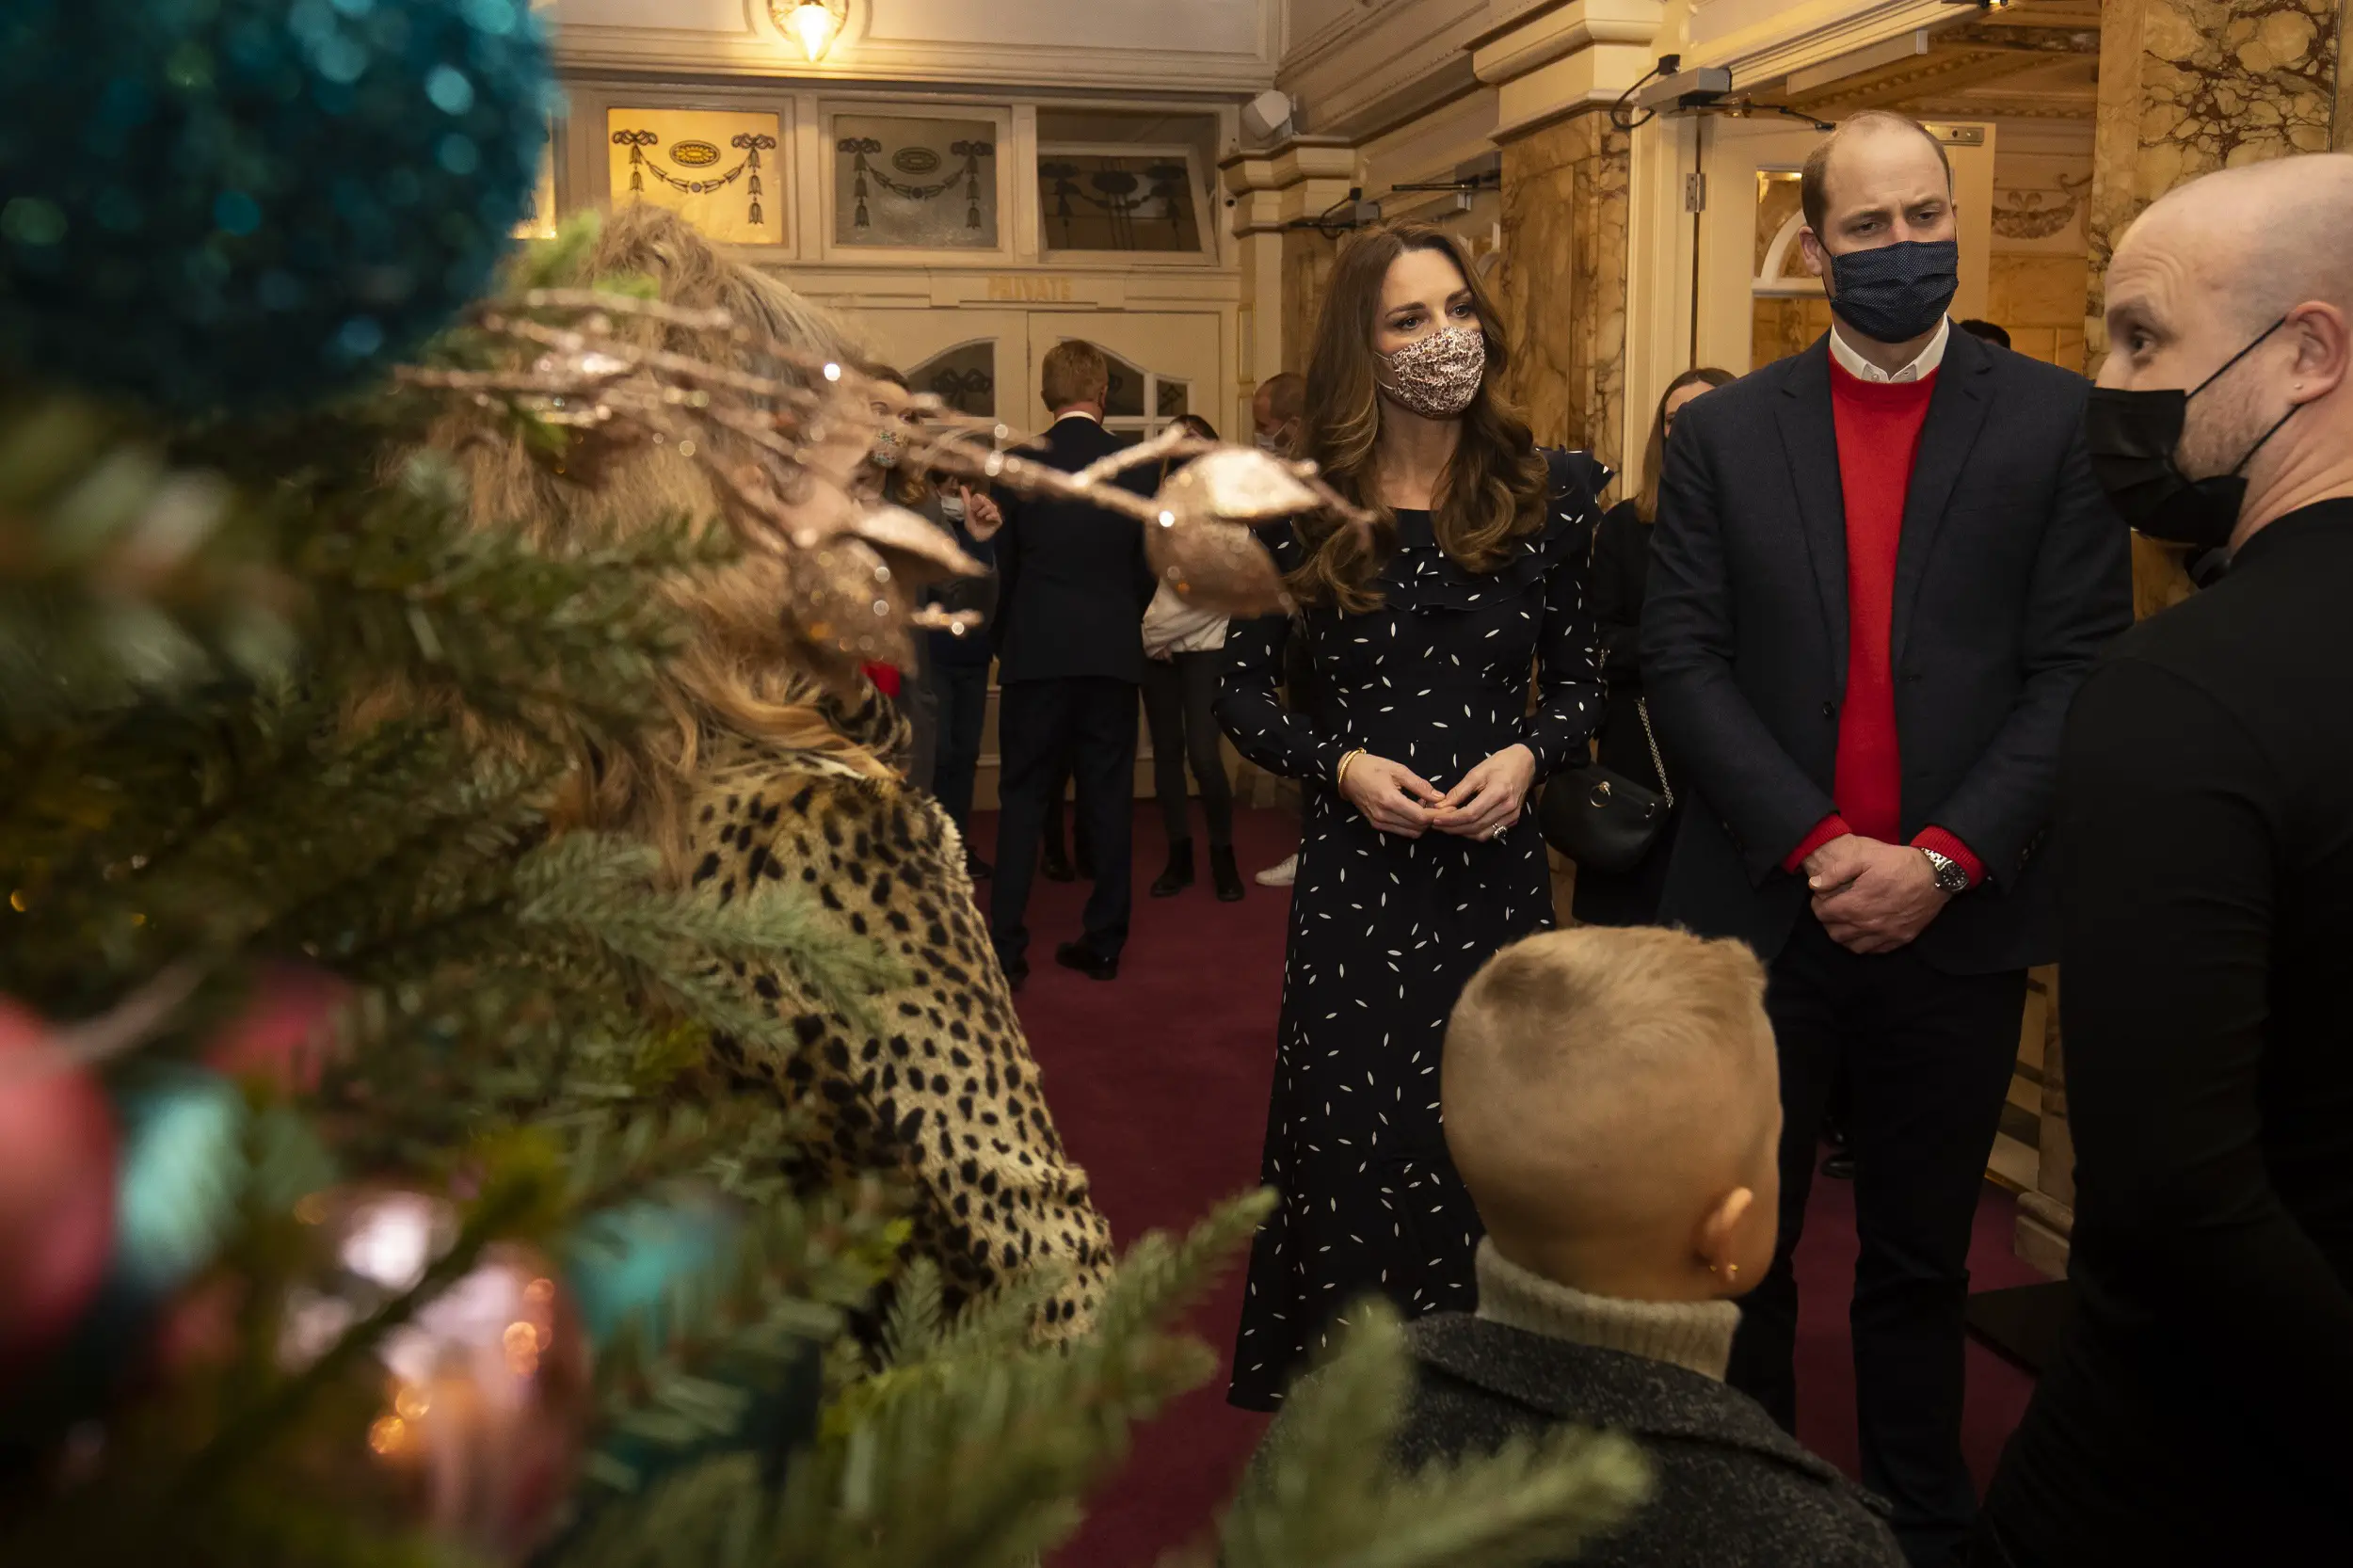 During the interval of tonight's special performance of The National Lottery’s Pantoland at The Palladium, The Duke and Duchess met a small number of key worker families to hear more about their experiences over the past year